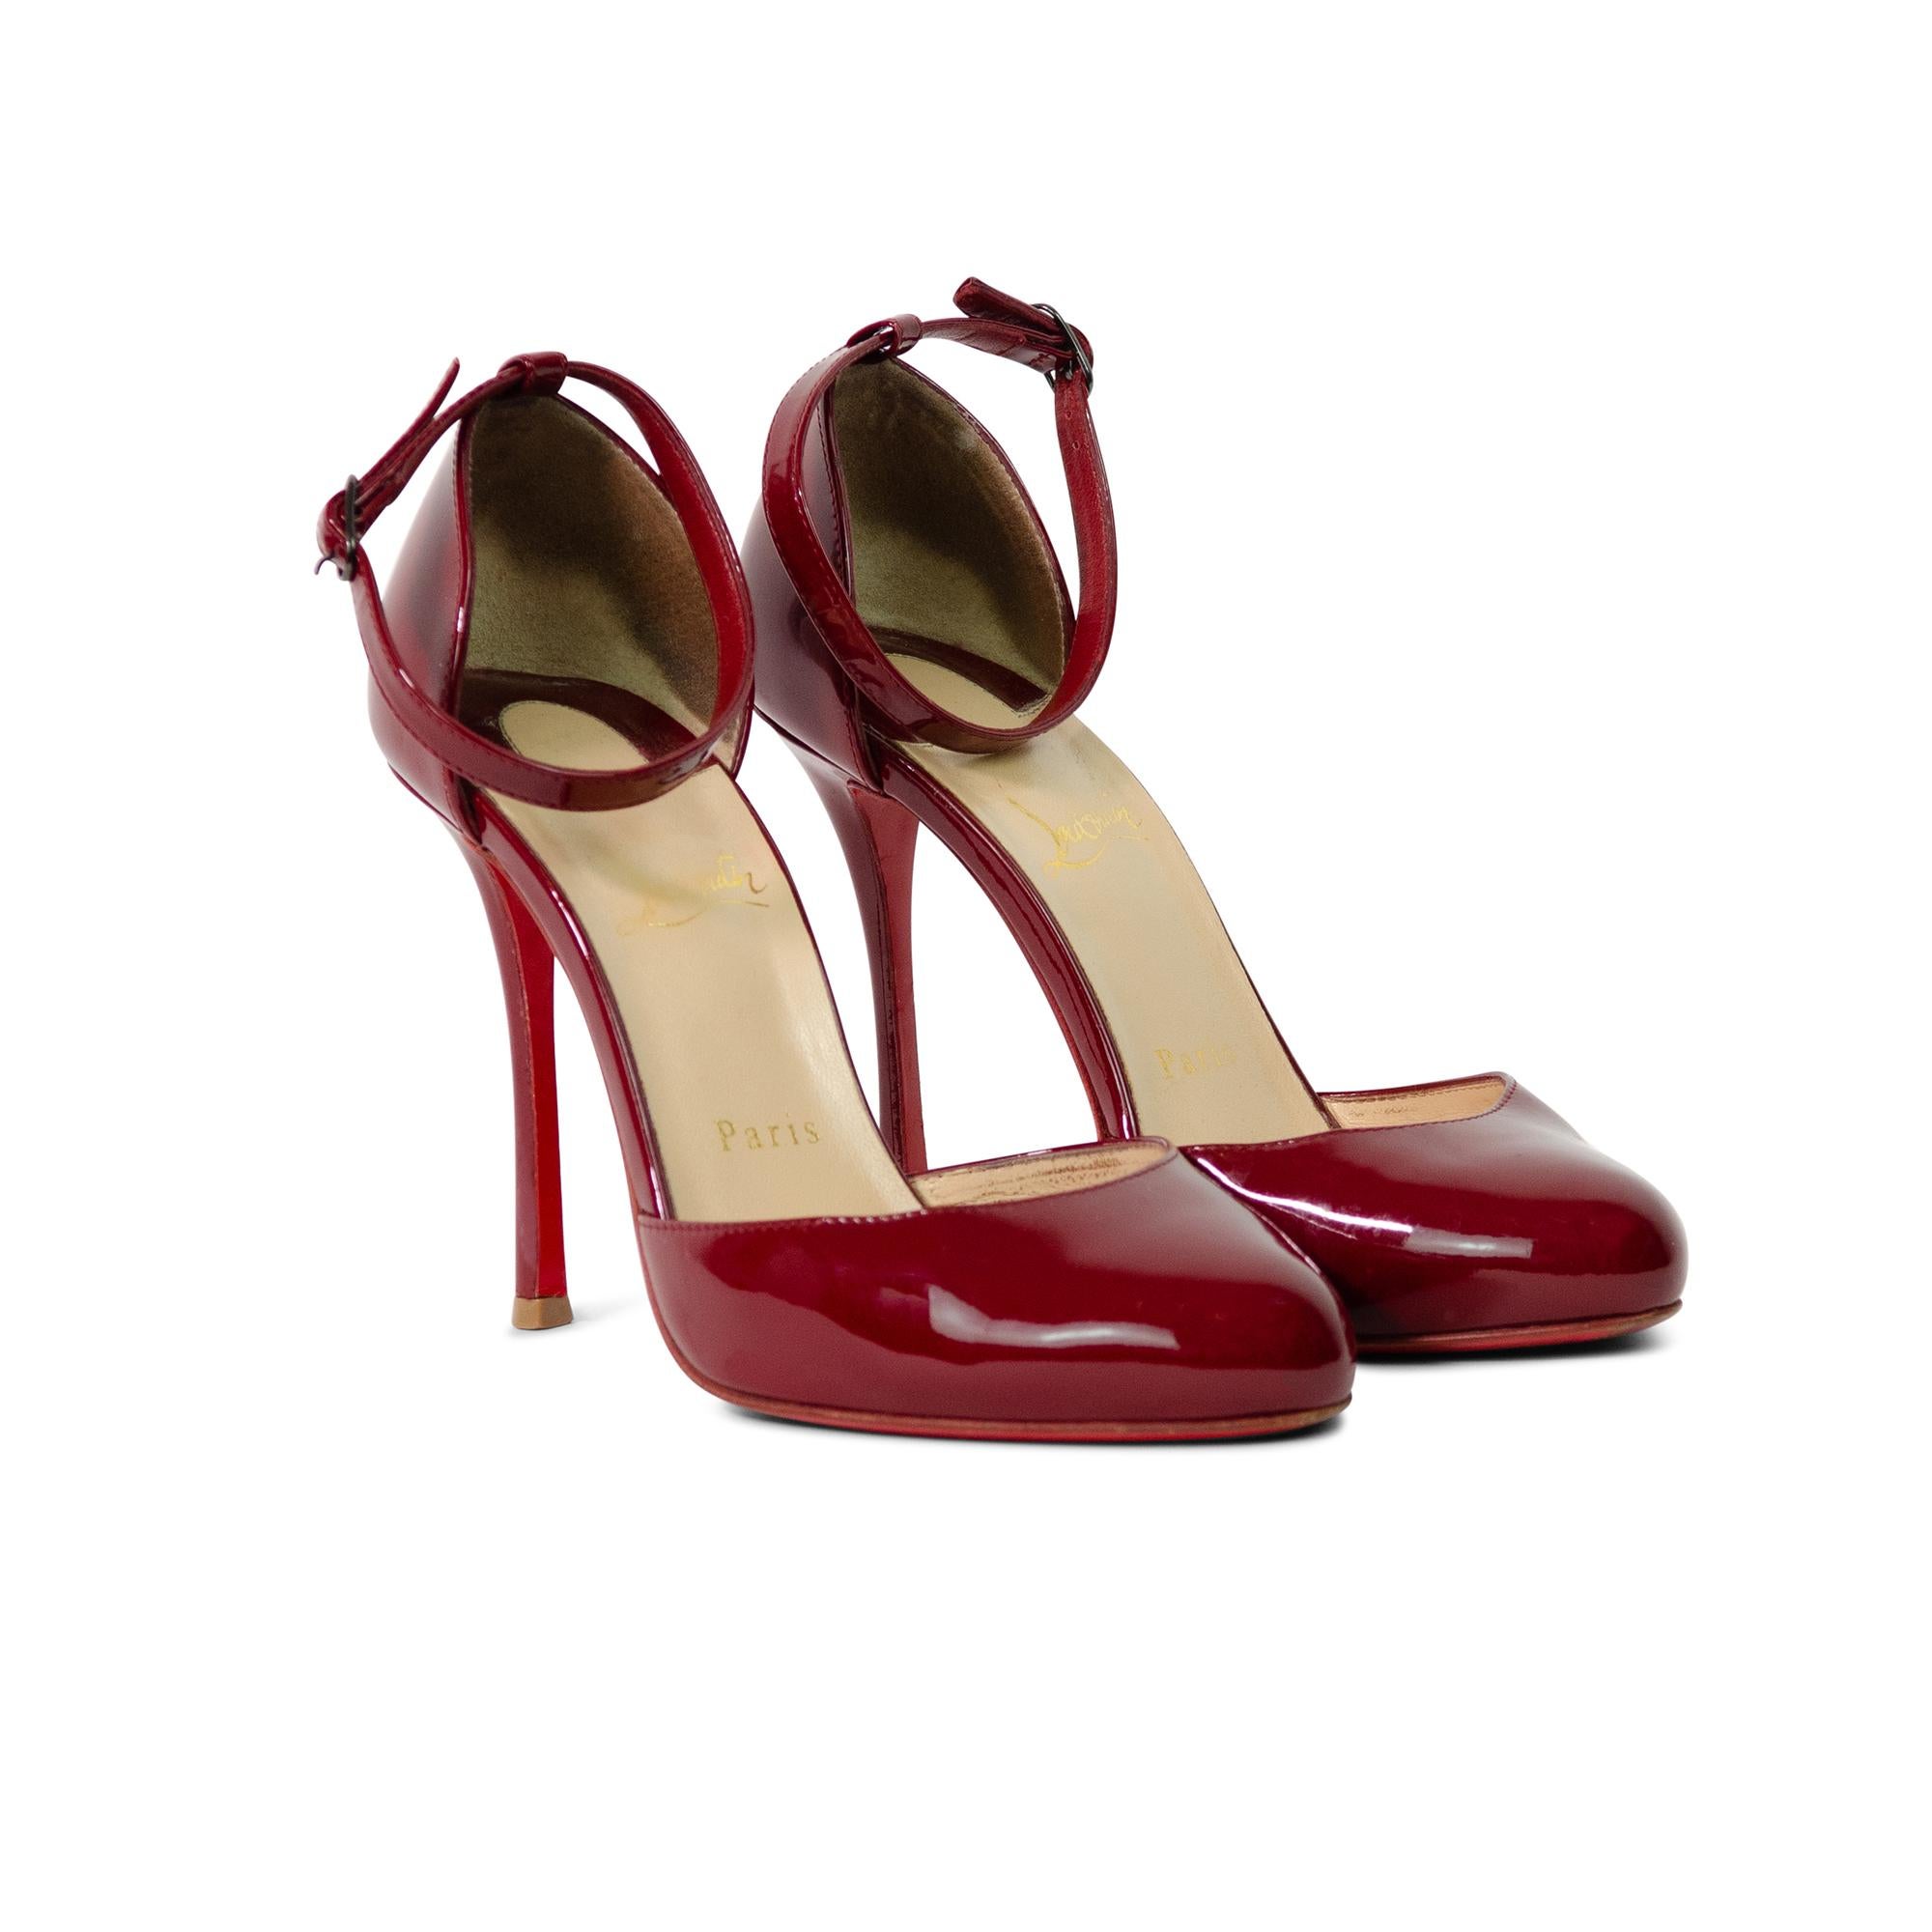 Beautiful Christian Louboutin Vintage Style Patent Red High Heels.

Made from a glossy deep red patent leather - these vintage inspired Louboutins feature an ankle strap, a rounded toe, 11cm heel and the iconic red sole. So luxurious they add a